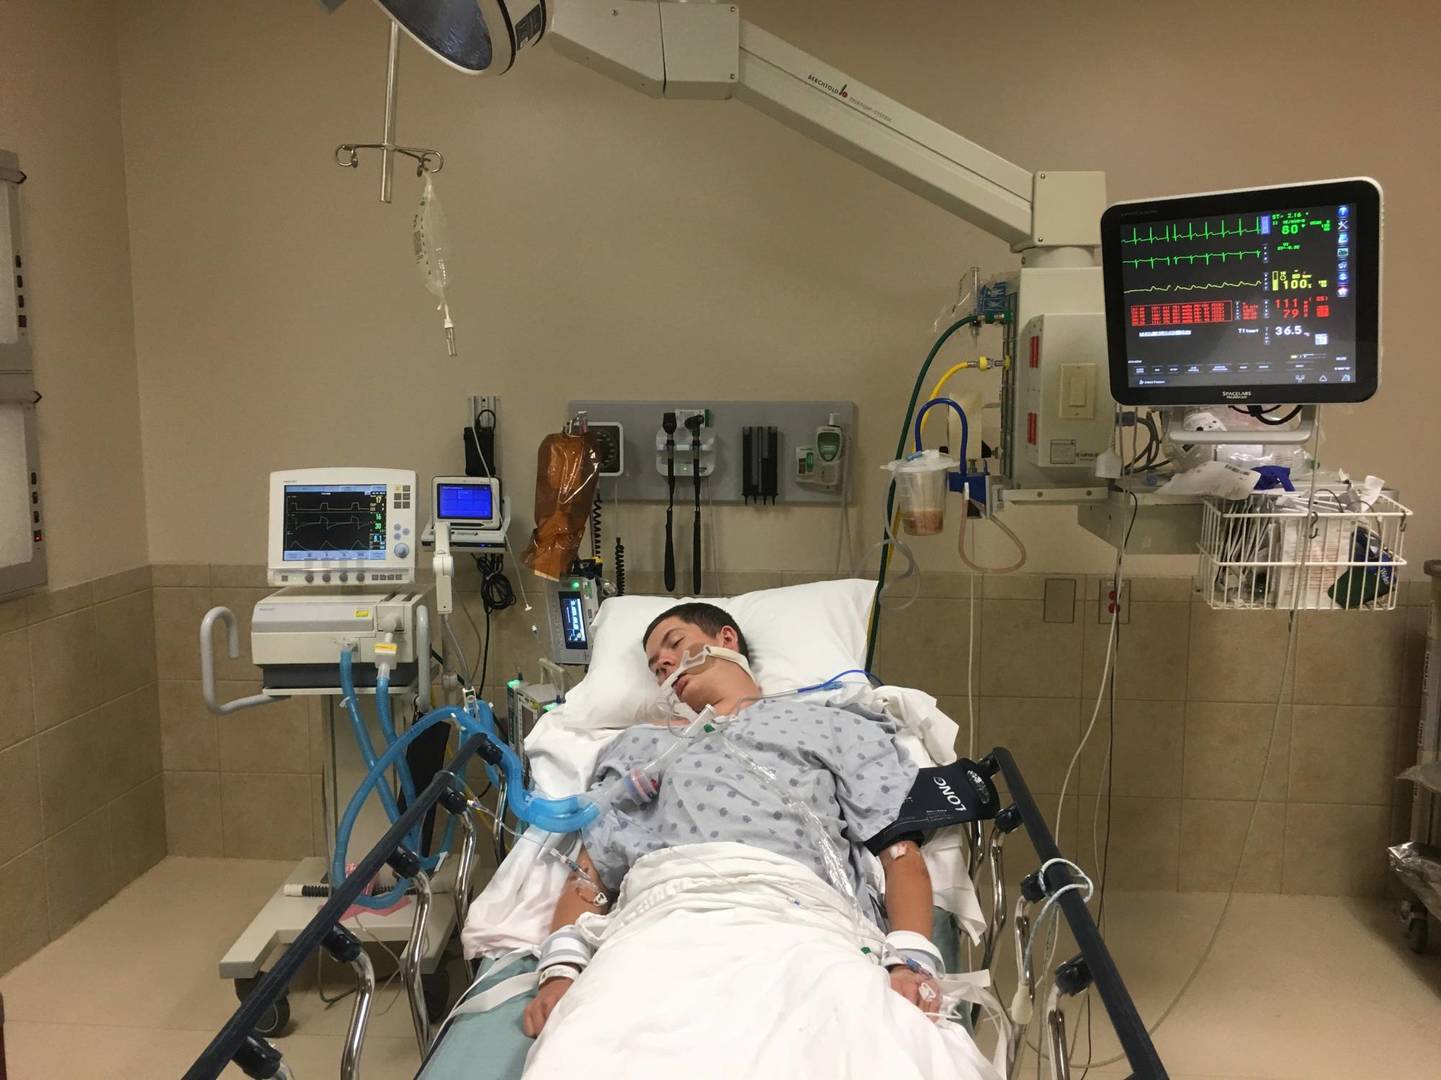 This May 2018, photo provided by Joseph Jenkins shows his son, Jay, in the emergency room of the Lexington Medical Center in Lexington, S.C. Jay Jenkins suffered acute respiratory failure and drifted into a coma, according to his medical records, after he says he vaped a product labeled as a smokable form of the cannabis extract CBD. Lab testing commissioned as part of an Associated Press investigation into CBD vapes showed the cartridge that Jenkins says he puffed contained a synthetic marijuana compound blamed for at least 11 deaths in Europe.  (Joseph Jenkins via AP)